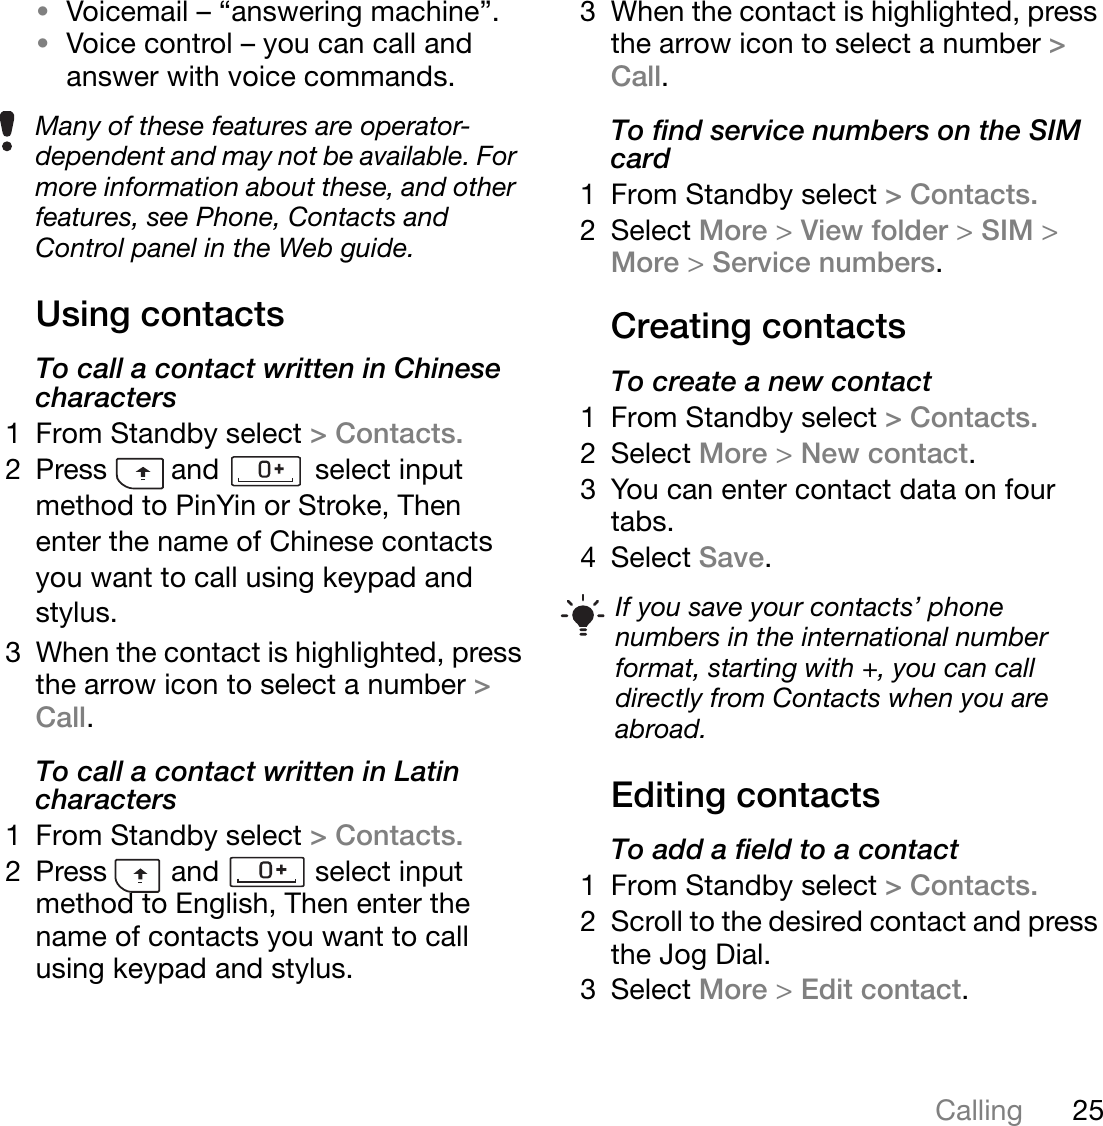 25CallingThis is the Internet version of the user&apos;s guide. © Print only for private use.•Voicemail – “answering machine”.•Voice control – you can call and answer with voice commands.Using contactsTo call a contact written in Chinese characters1 From Standby select &gt; Contacts.2 Press        and            select input method to PinYin or Stroke, Then enter the name of Chinese contacts you want to call using keypad and stylus.3 When the contact is highlighted, press the arrow icon to select a number &gt;Call.To call a contact written in Latin characters1 From Standby select &gt; Contacts.2 Press        and            select input method to English, Then enter the name of contacts you want to call using keypad and stylus. 3 When the contact is highlighted, press the arrow icon to select a number &gt; Call.To find service numbers on the SIM card1 From Standby select &gt; Contacts.2 Select More &gt;View folder &gt;SIM &gt;More &gt;Service numbers.Creating contactsTo create a new contact1 From Standby select &gt; Contacts.2 Select More &gt;New contact.3 You can enter contact data on four tabs.4 Select Save.Editing contactsTo add a field to a contact1 From Standby select &gt; Contacts.2 Scroll to the desired contact and press the Jog Dial.3 Select More &gt;Edit contact.Many of these features are operator-dependent and may not be available. For more information about these, and other features, see Phone, Contacts and Control panel in the Web guide.If you save your contacts’ phone numbers in the international number format, starting with +, you can call directly from Contacts when you are abroad.